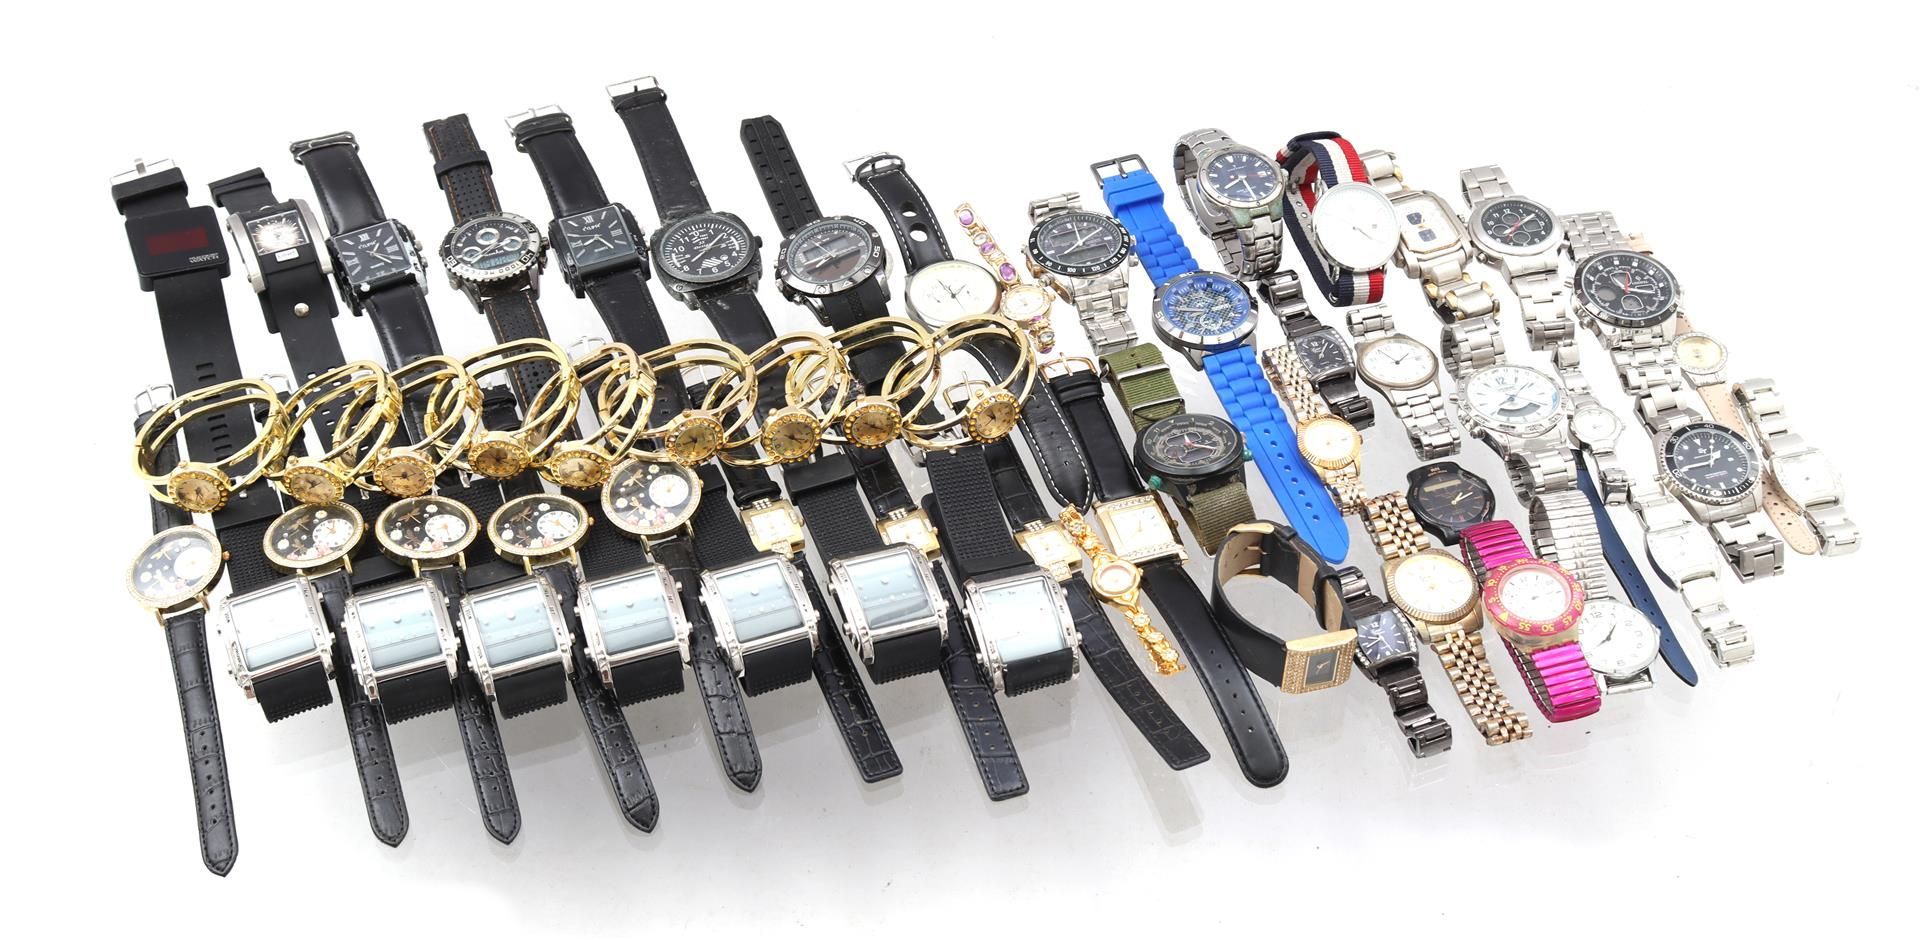 56 various watches